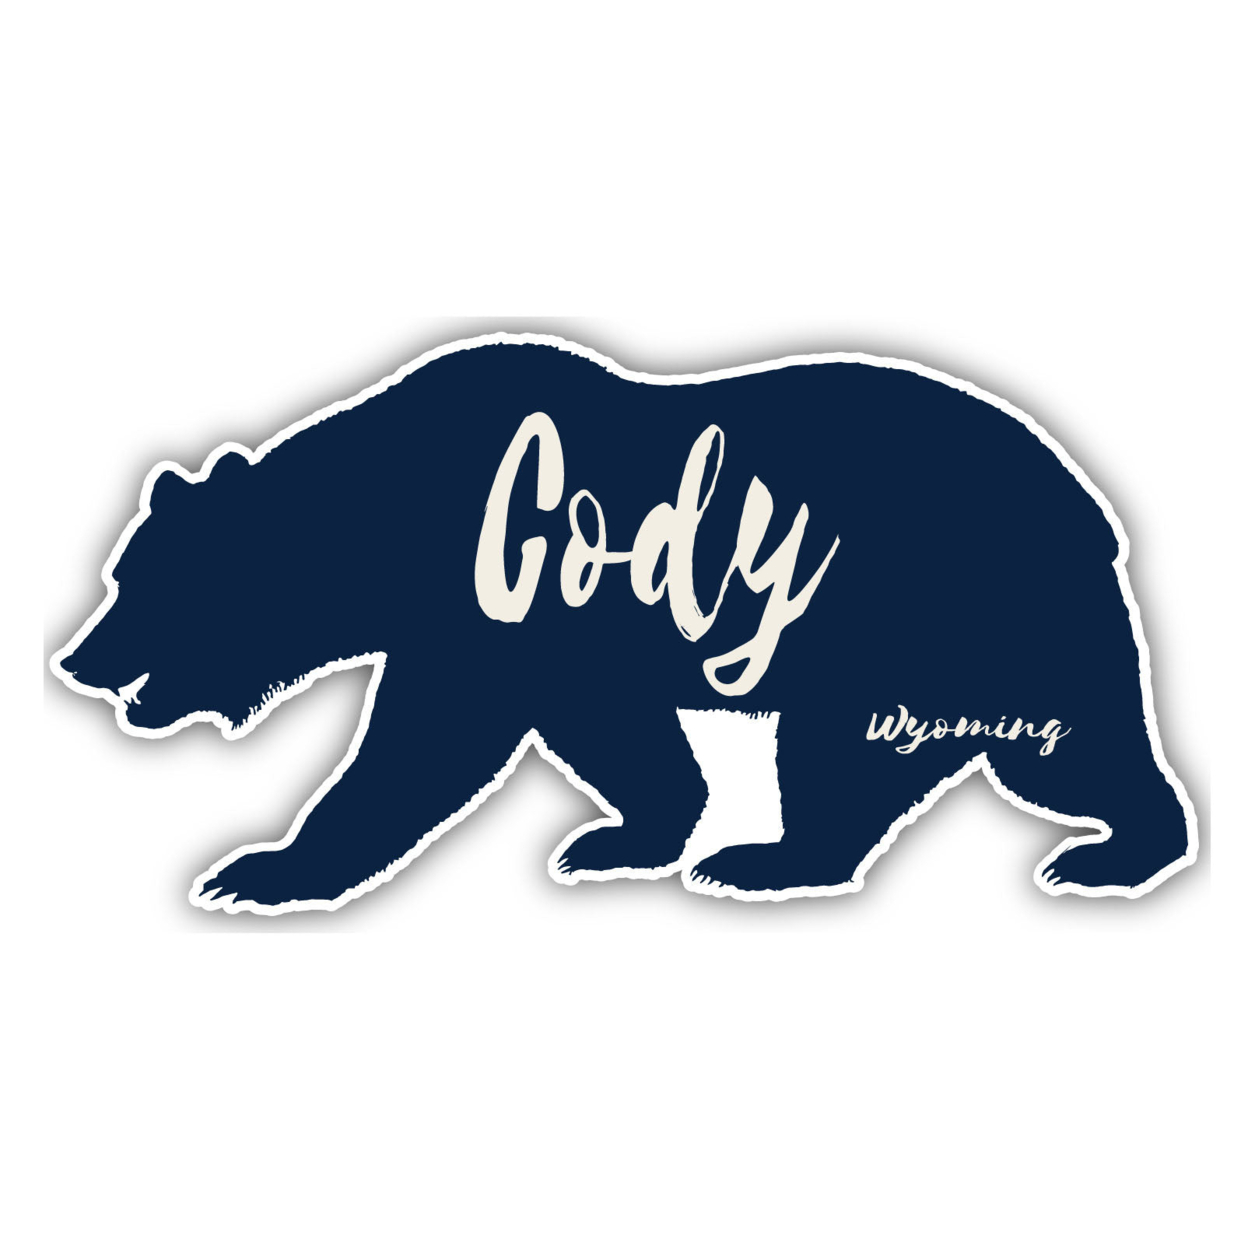 Cody Wyoming Souvenir Decorative Stickers (Choose Theme And Size) - 4-Pack, 12-Inch, Bear